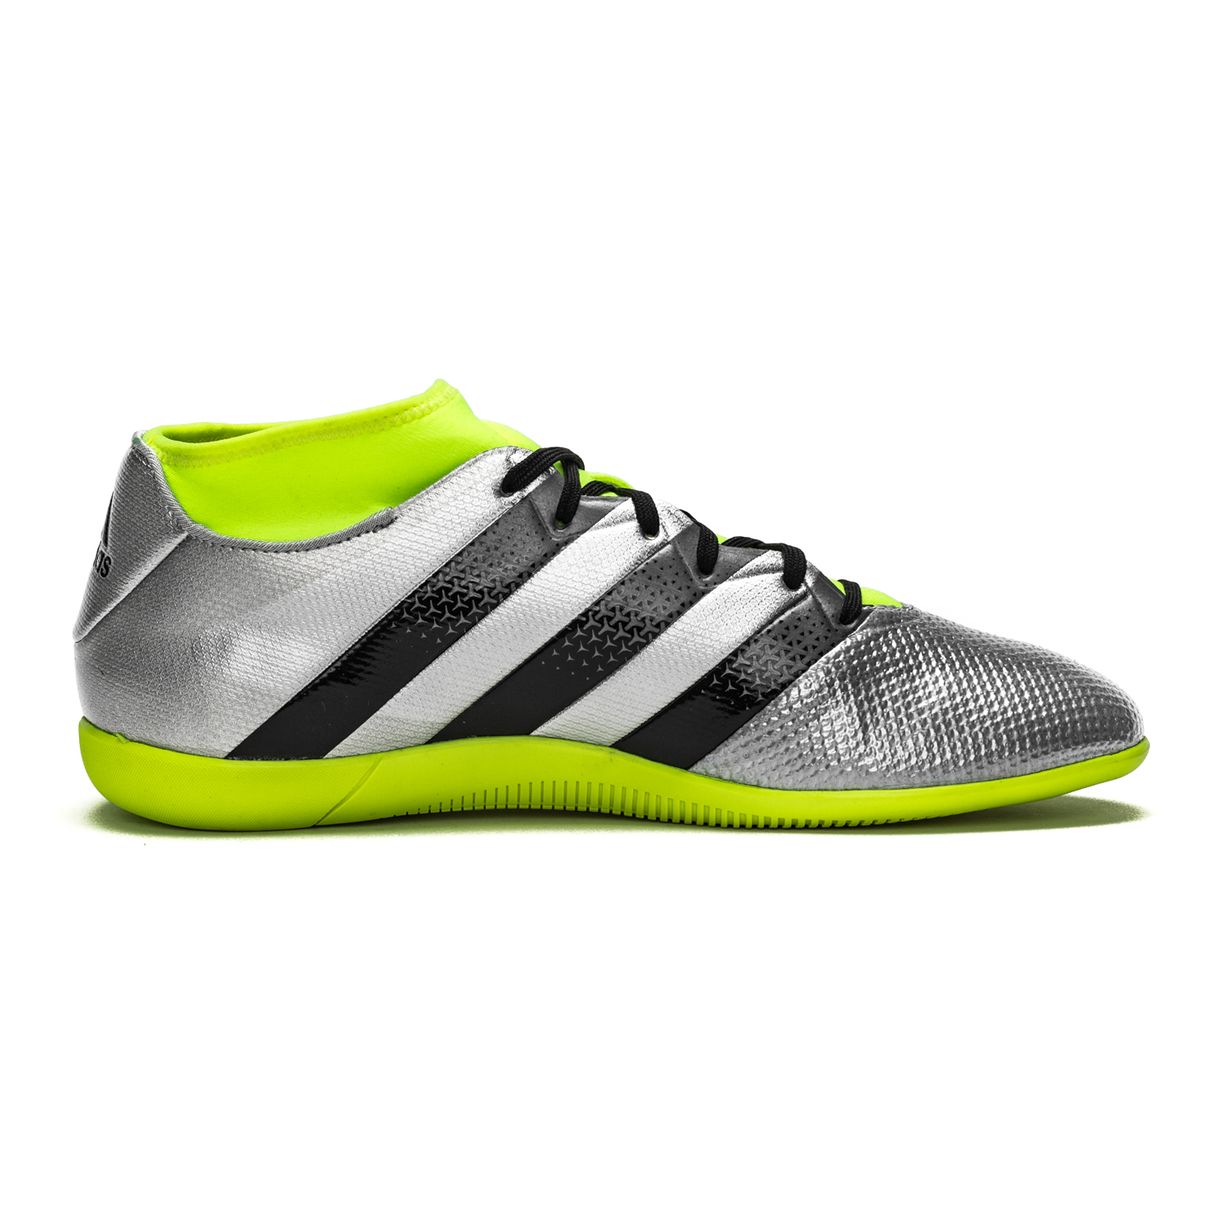 adidas football shoes price in pakistan